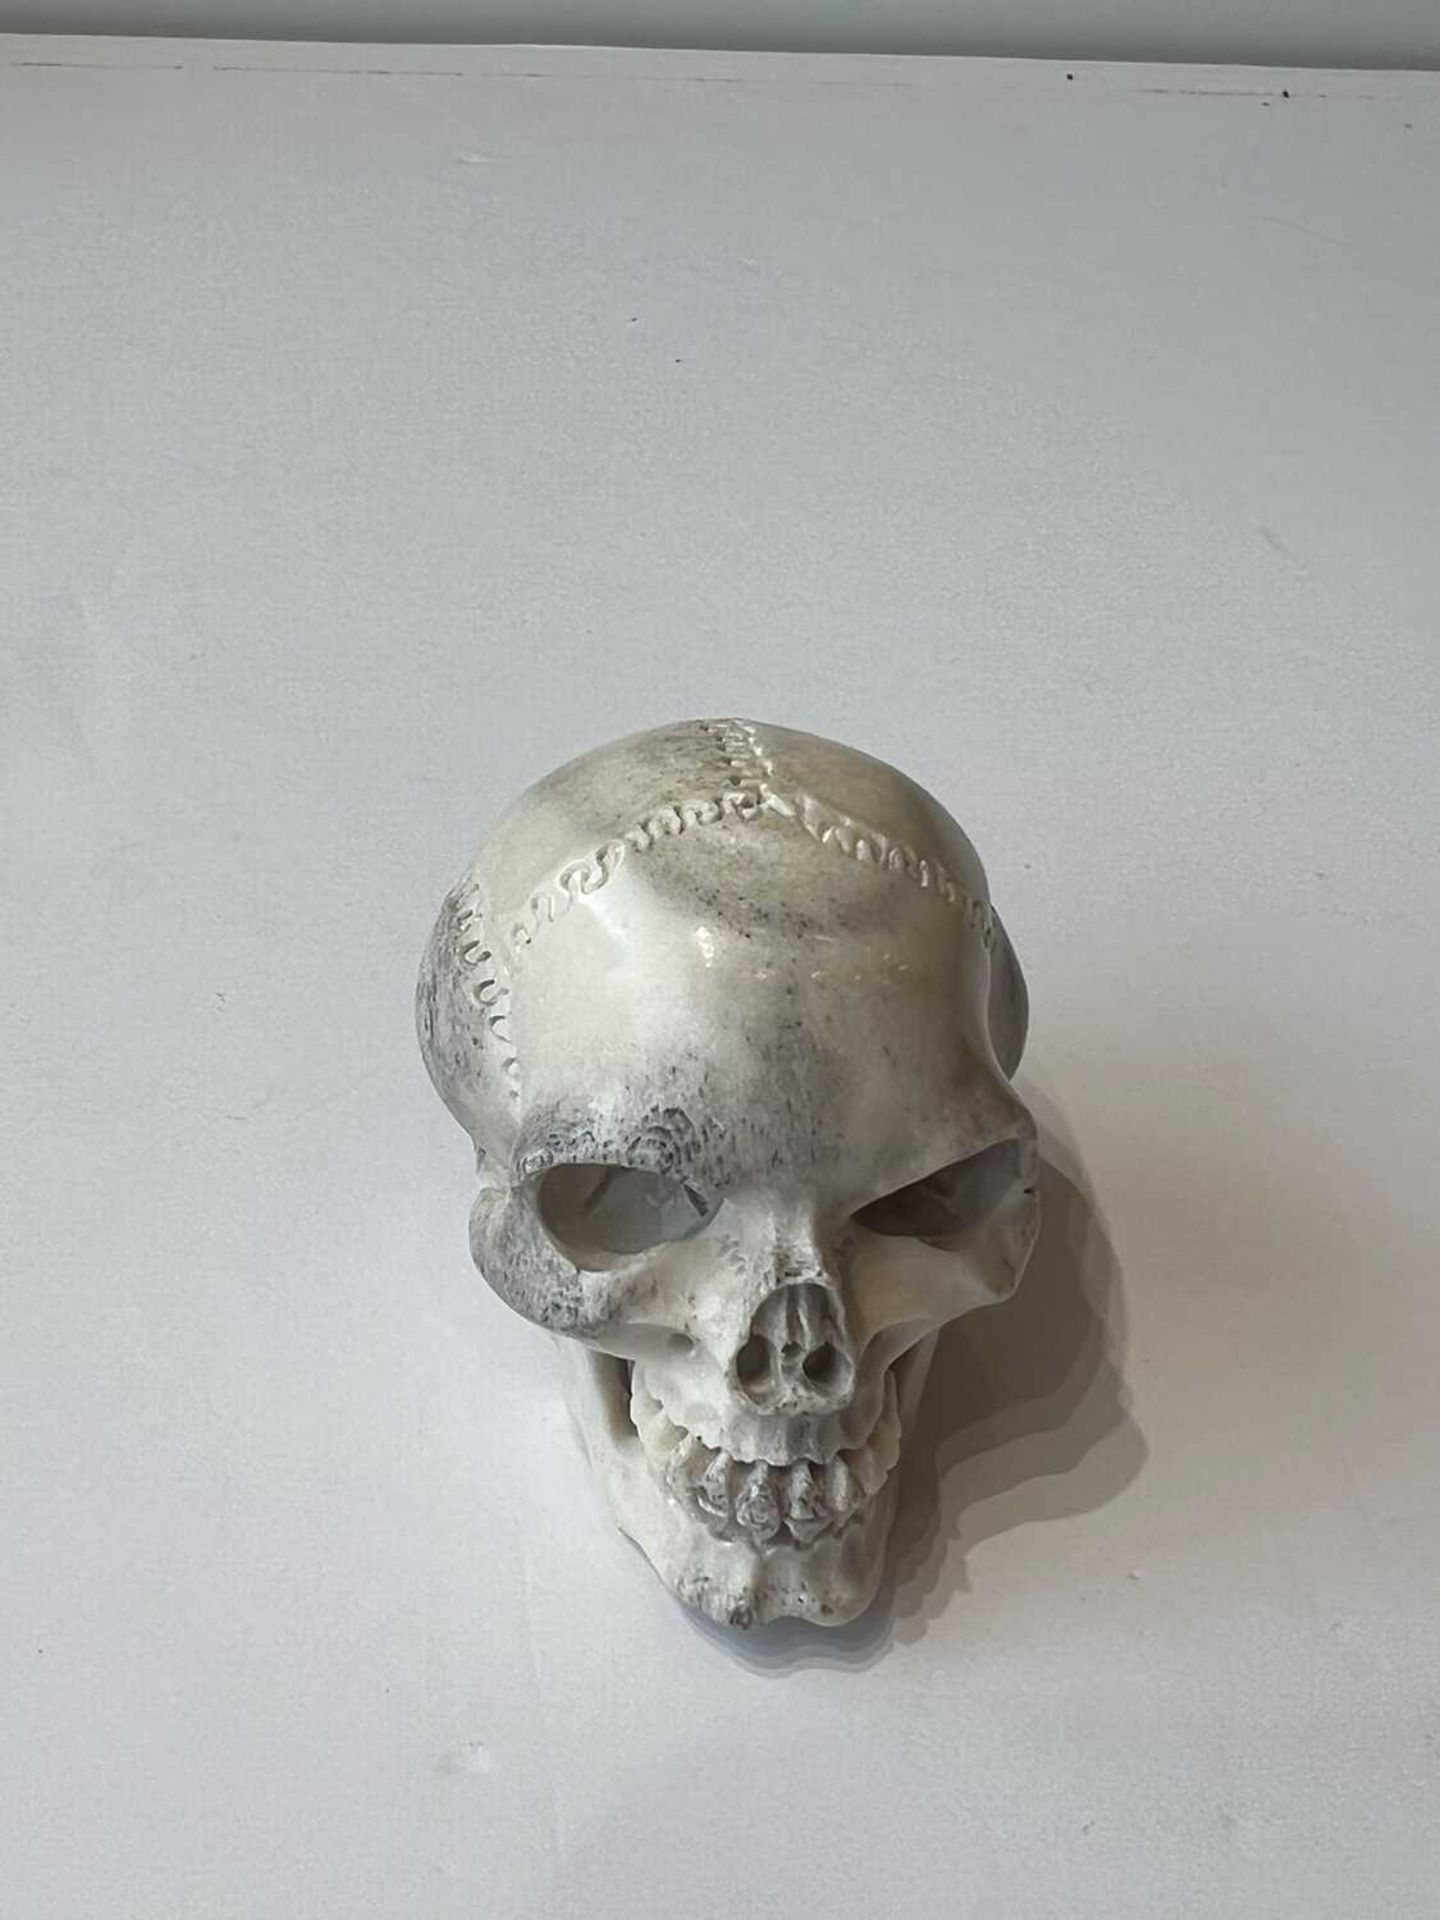 A CARVED MOOSE ANTLER MEMENTO MORI IN THE FORM OF A HUMAN SKULL - Image 3 of 5